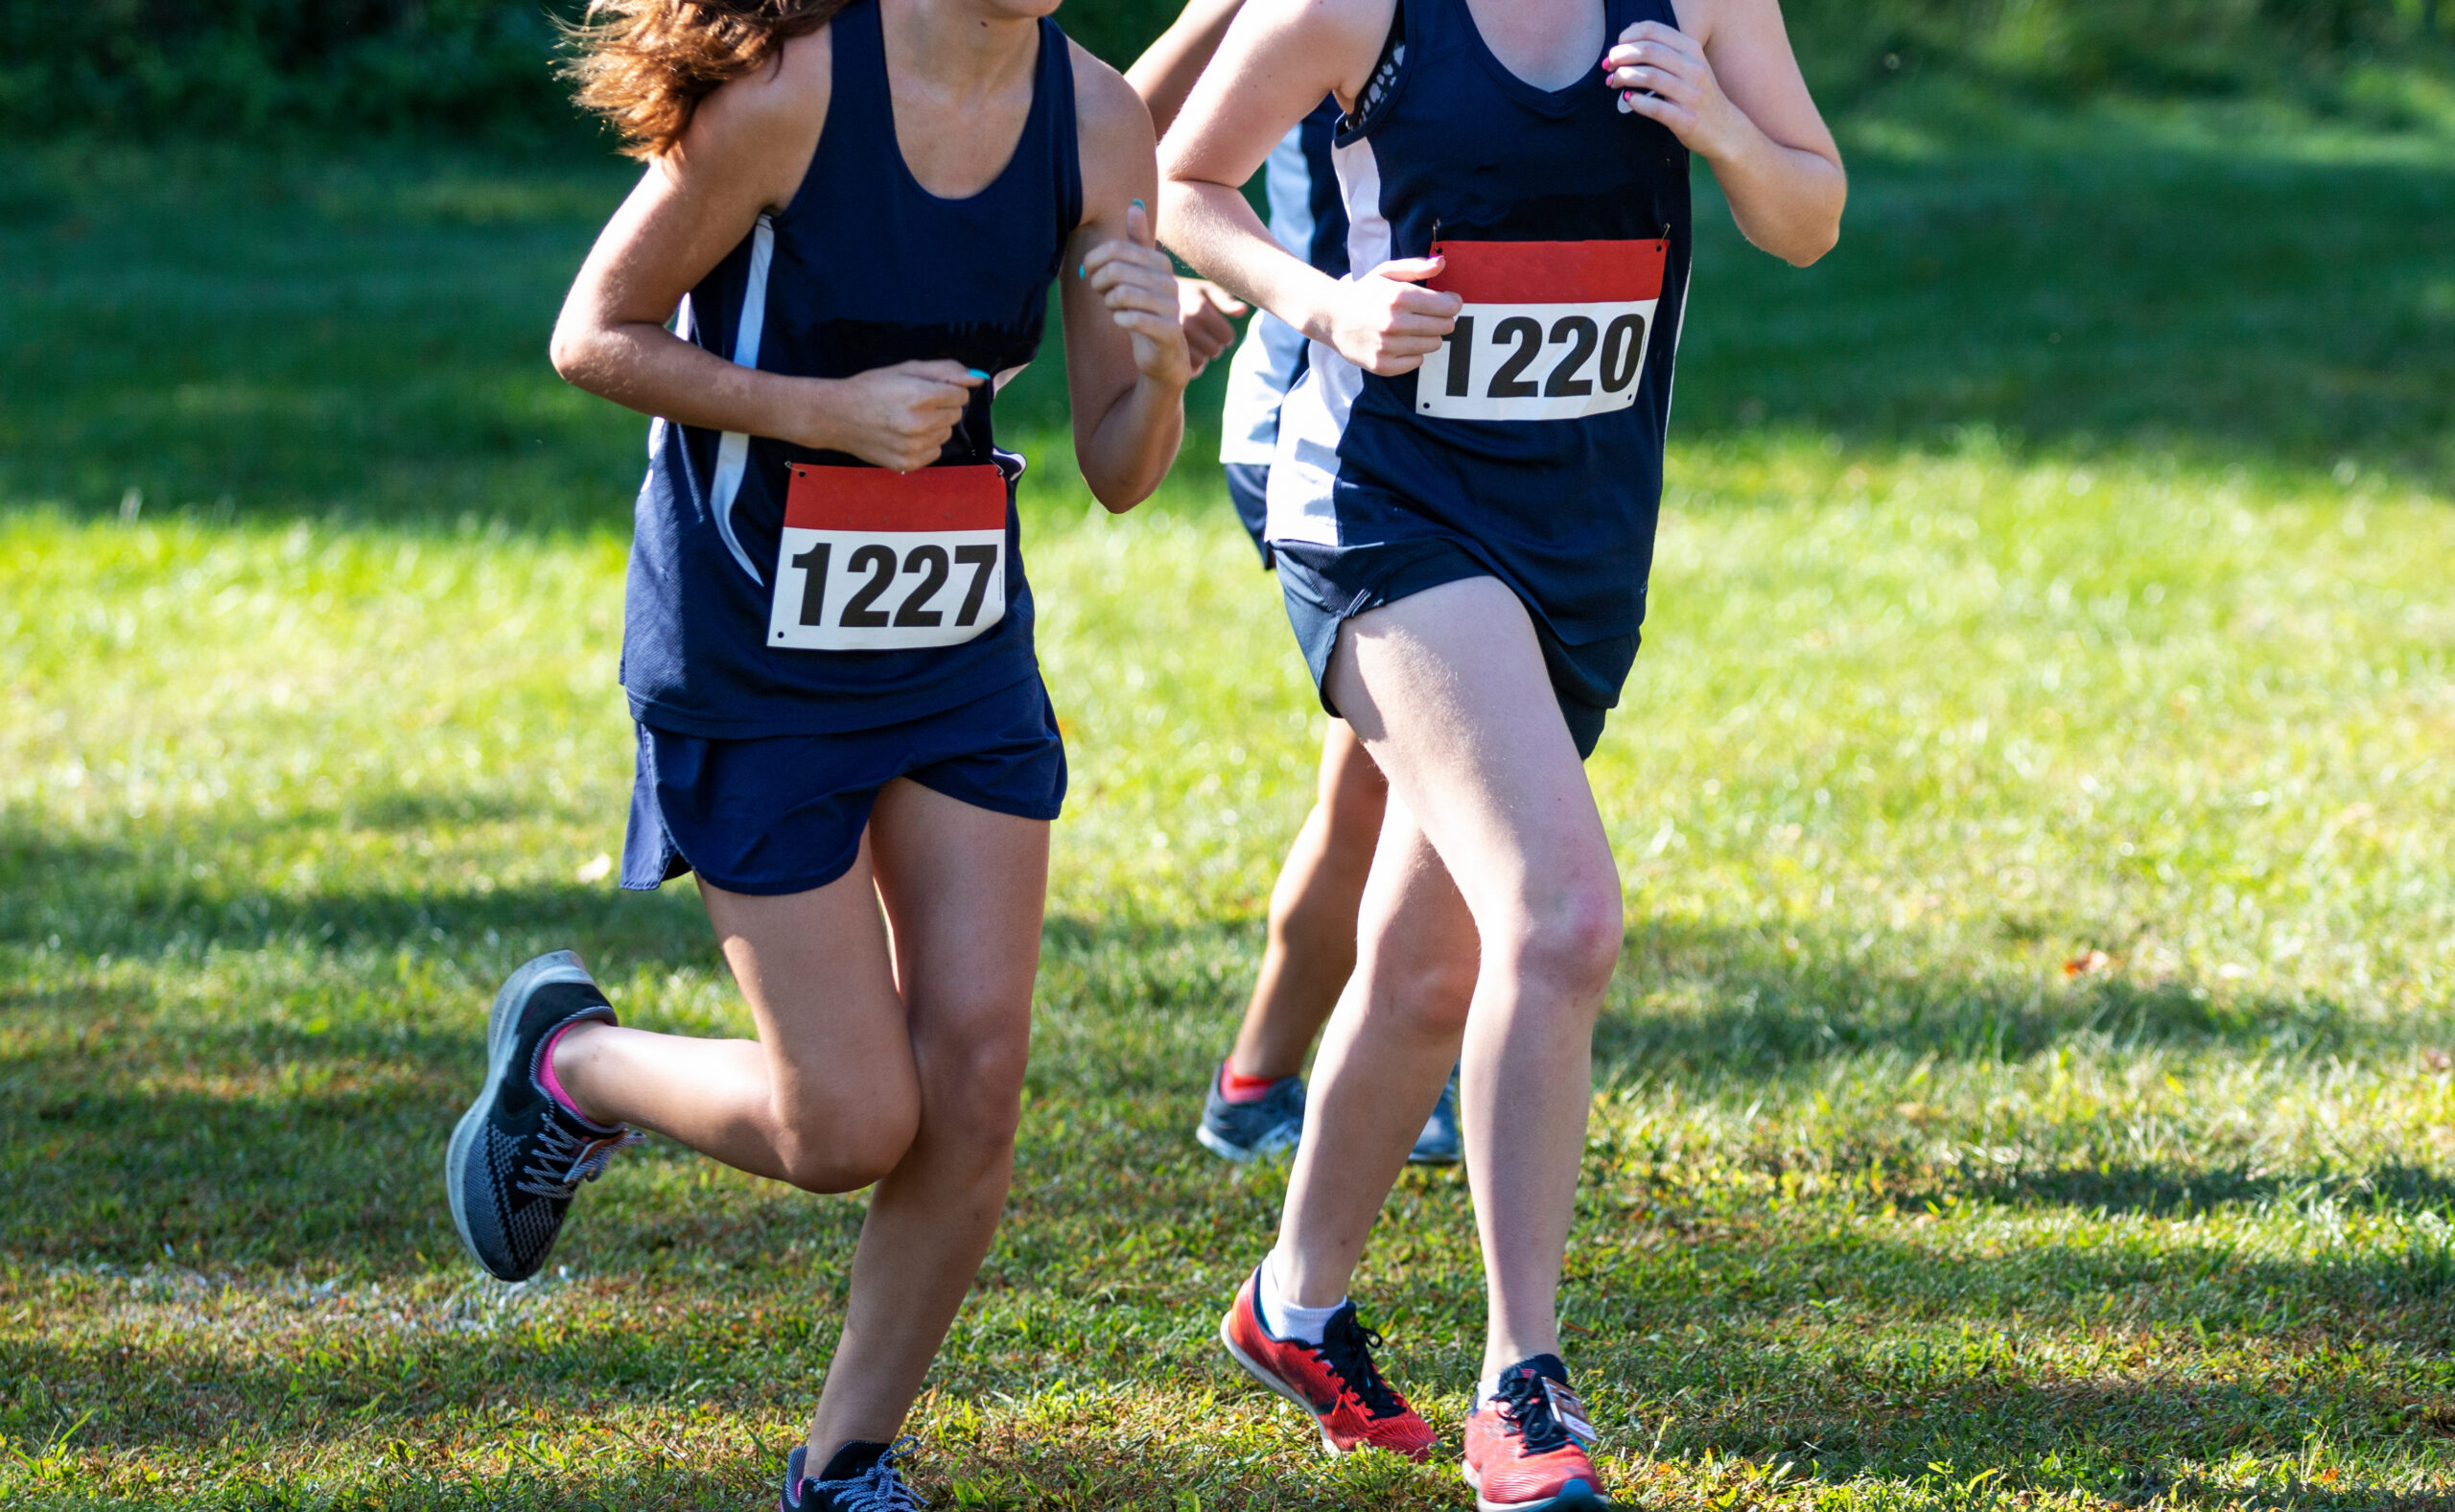 Three high school girls competing in a high school cross country race wearing blue uniforms on a grass field.